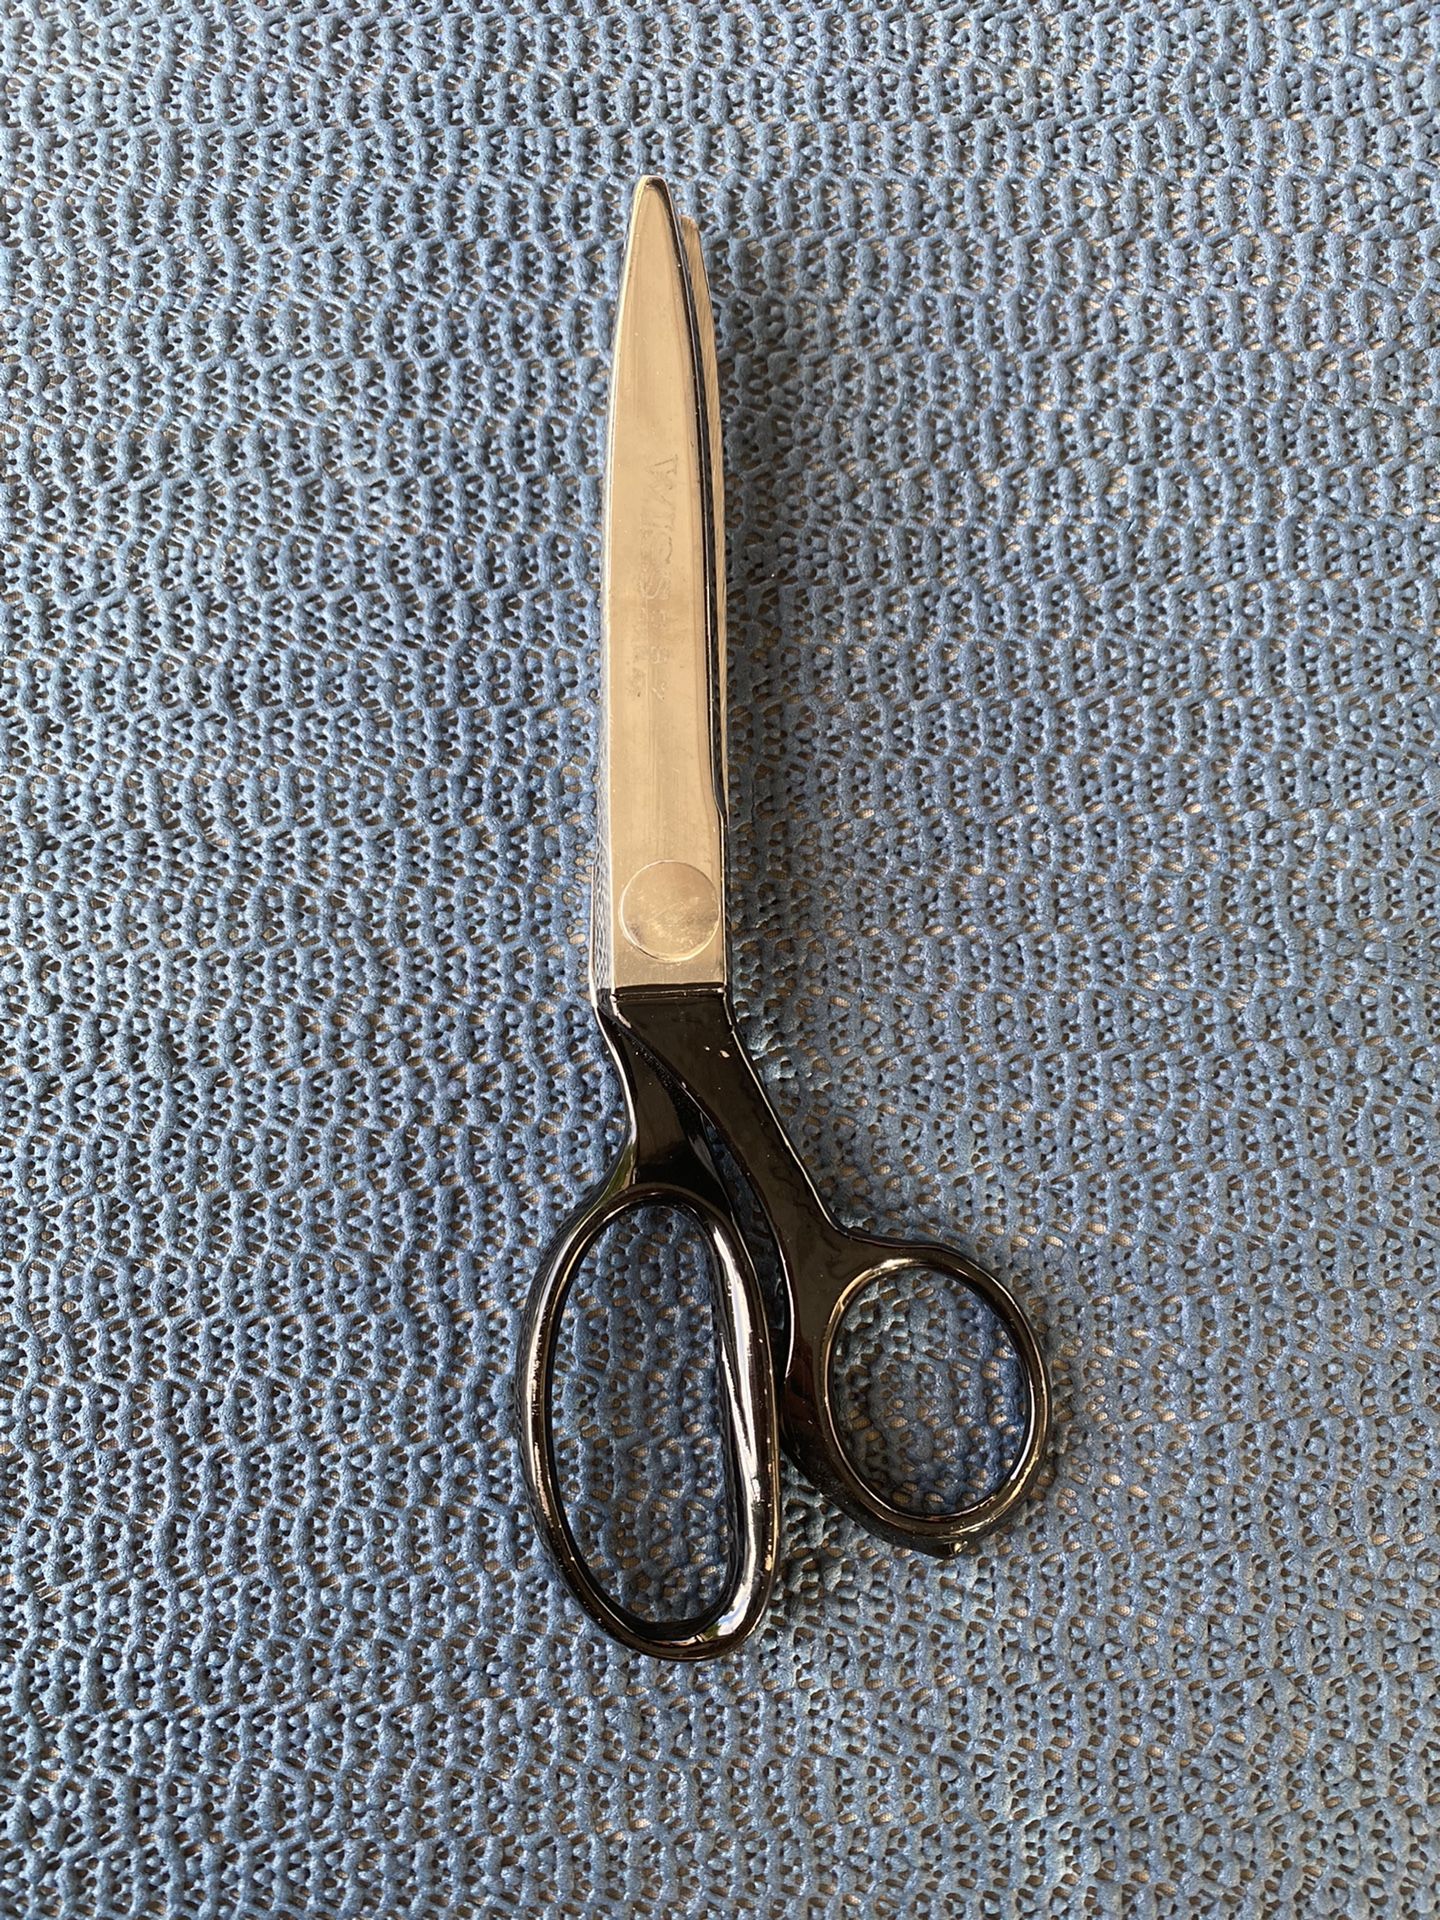 VINTAGE WISS PINKING SHEARS CB7